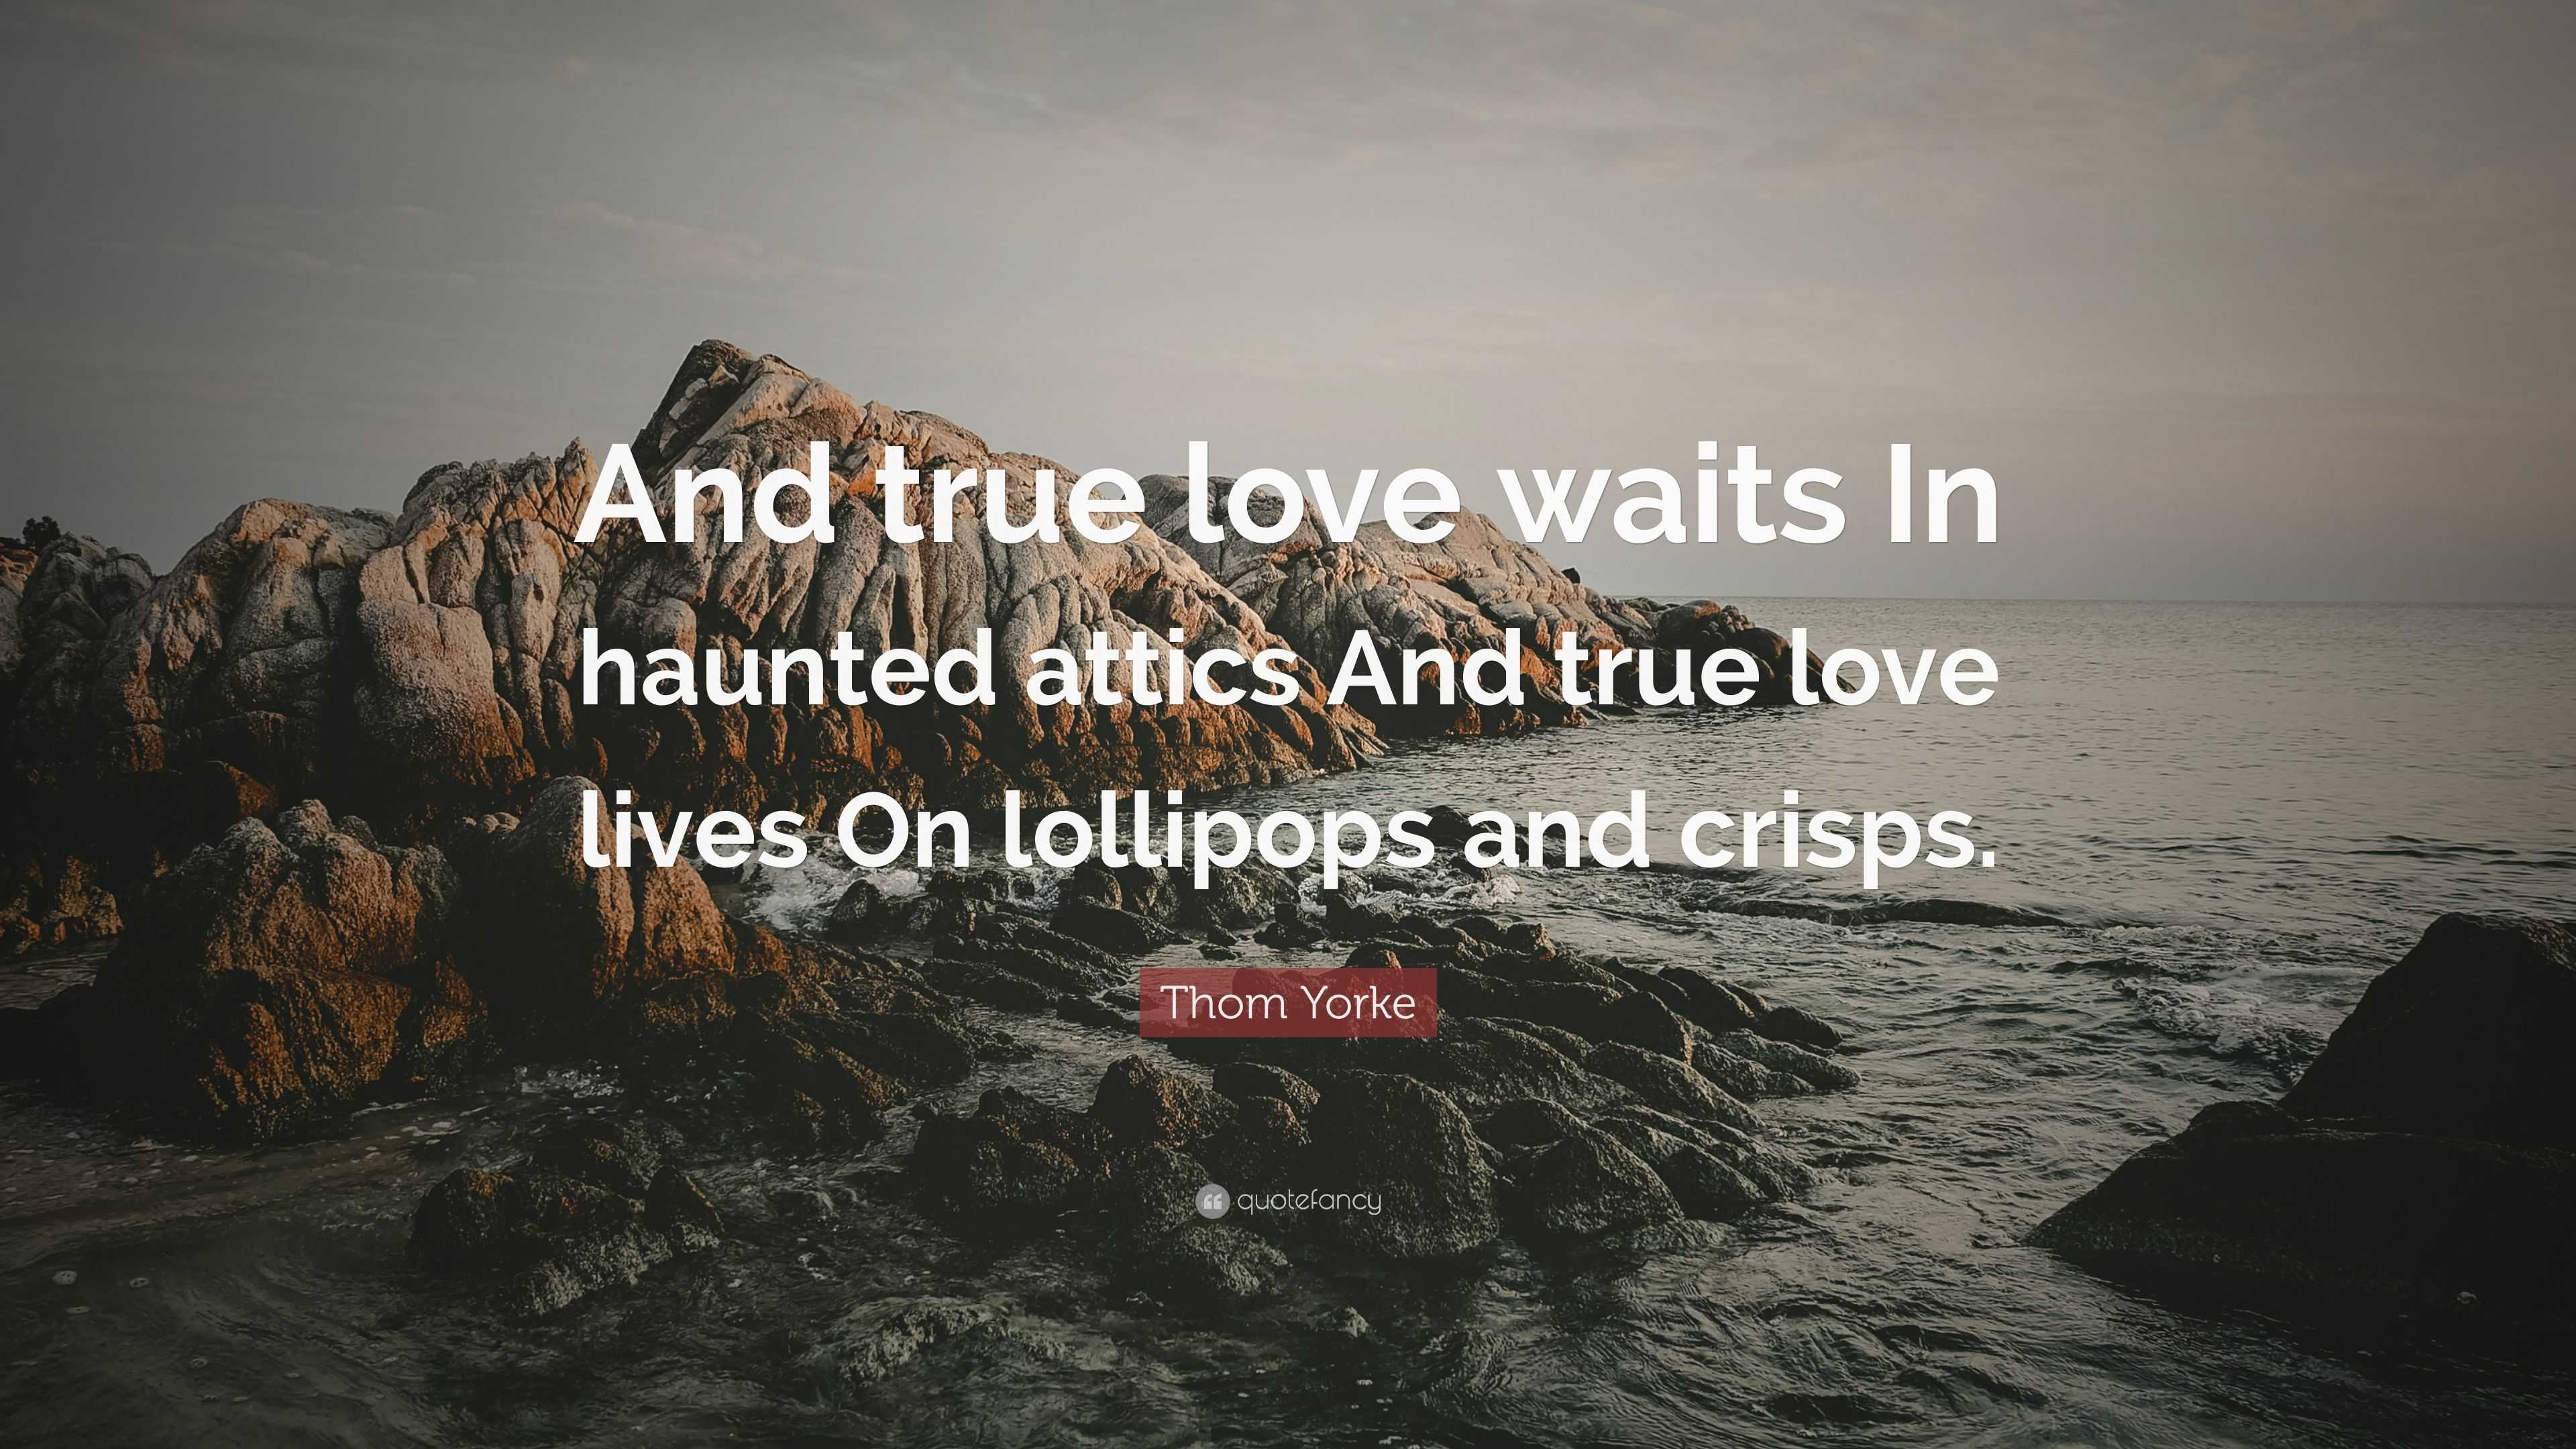 Thom Yorke Quote “And true love waits In haunted attics And true love lives